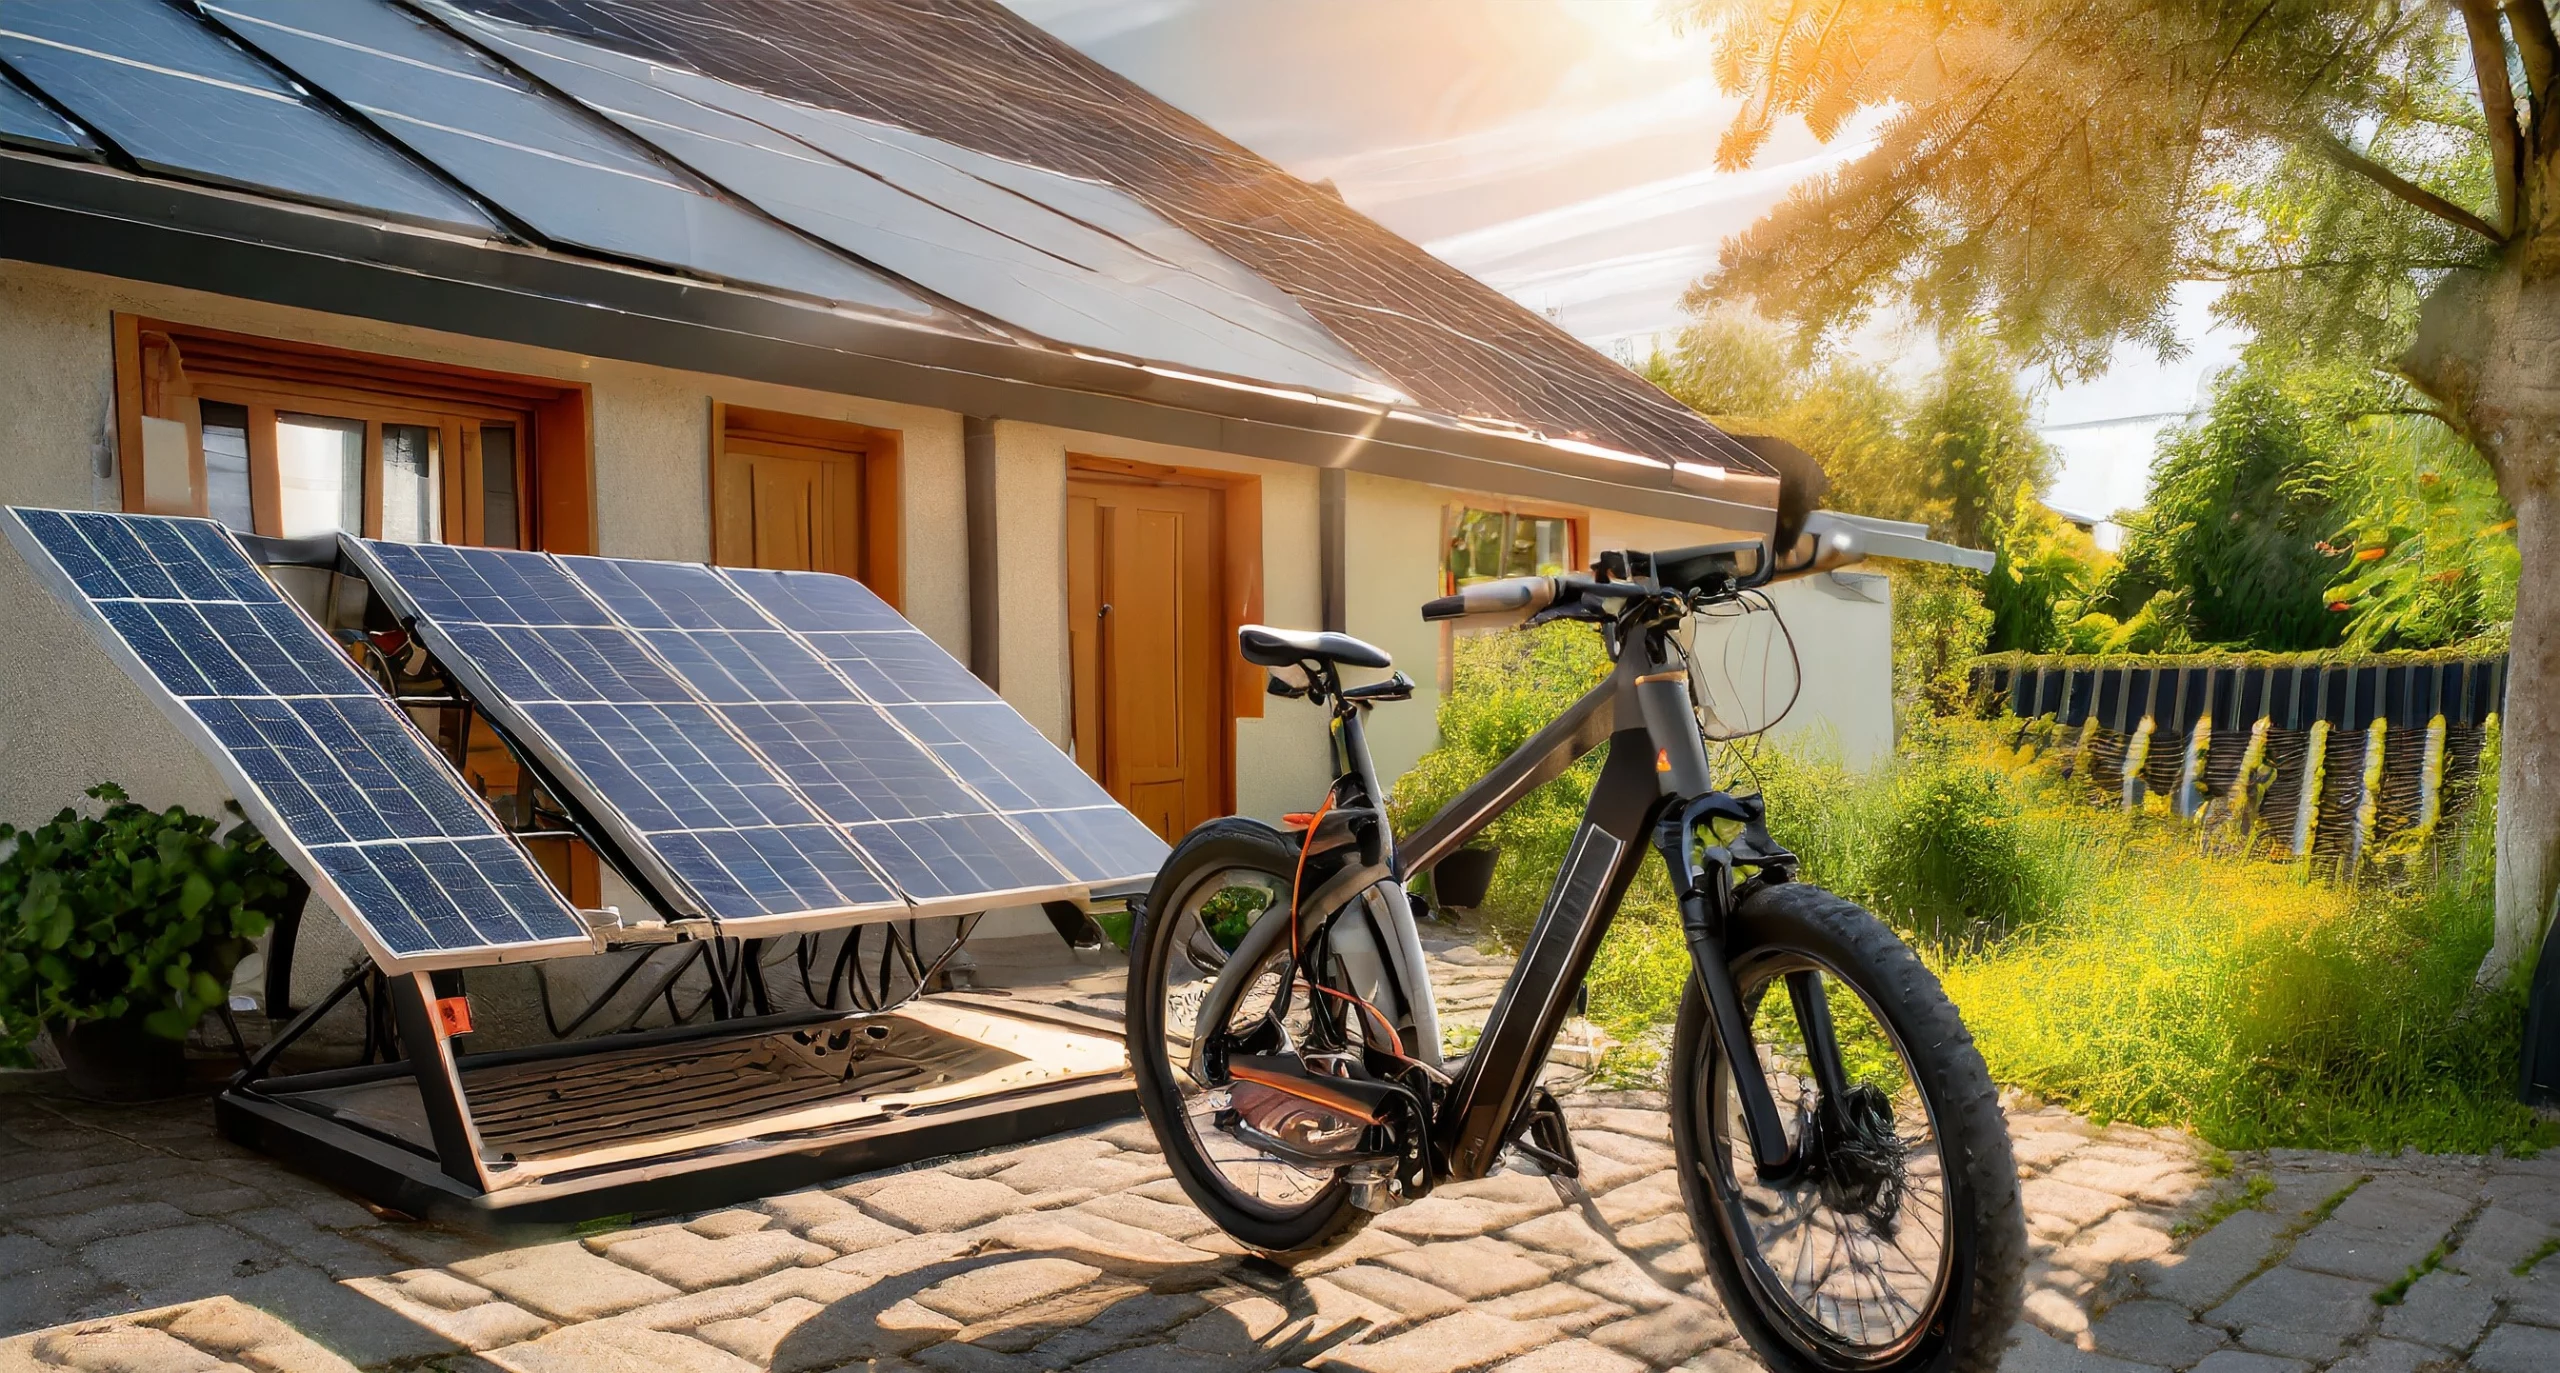 How to Charge An E Bike with a Solar Panel At Home?